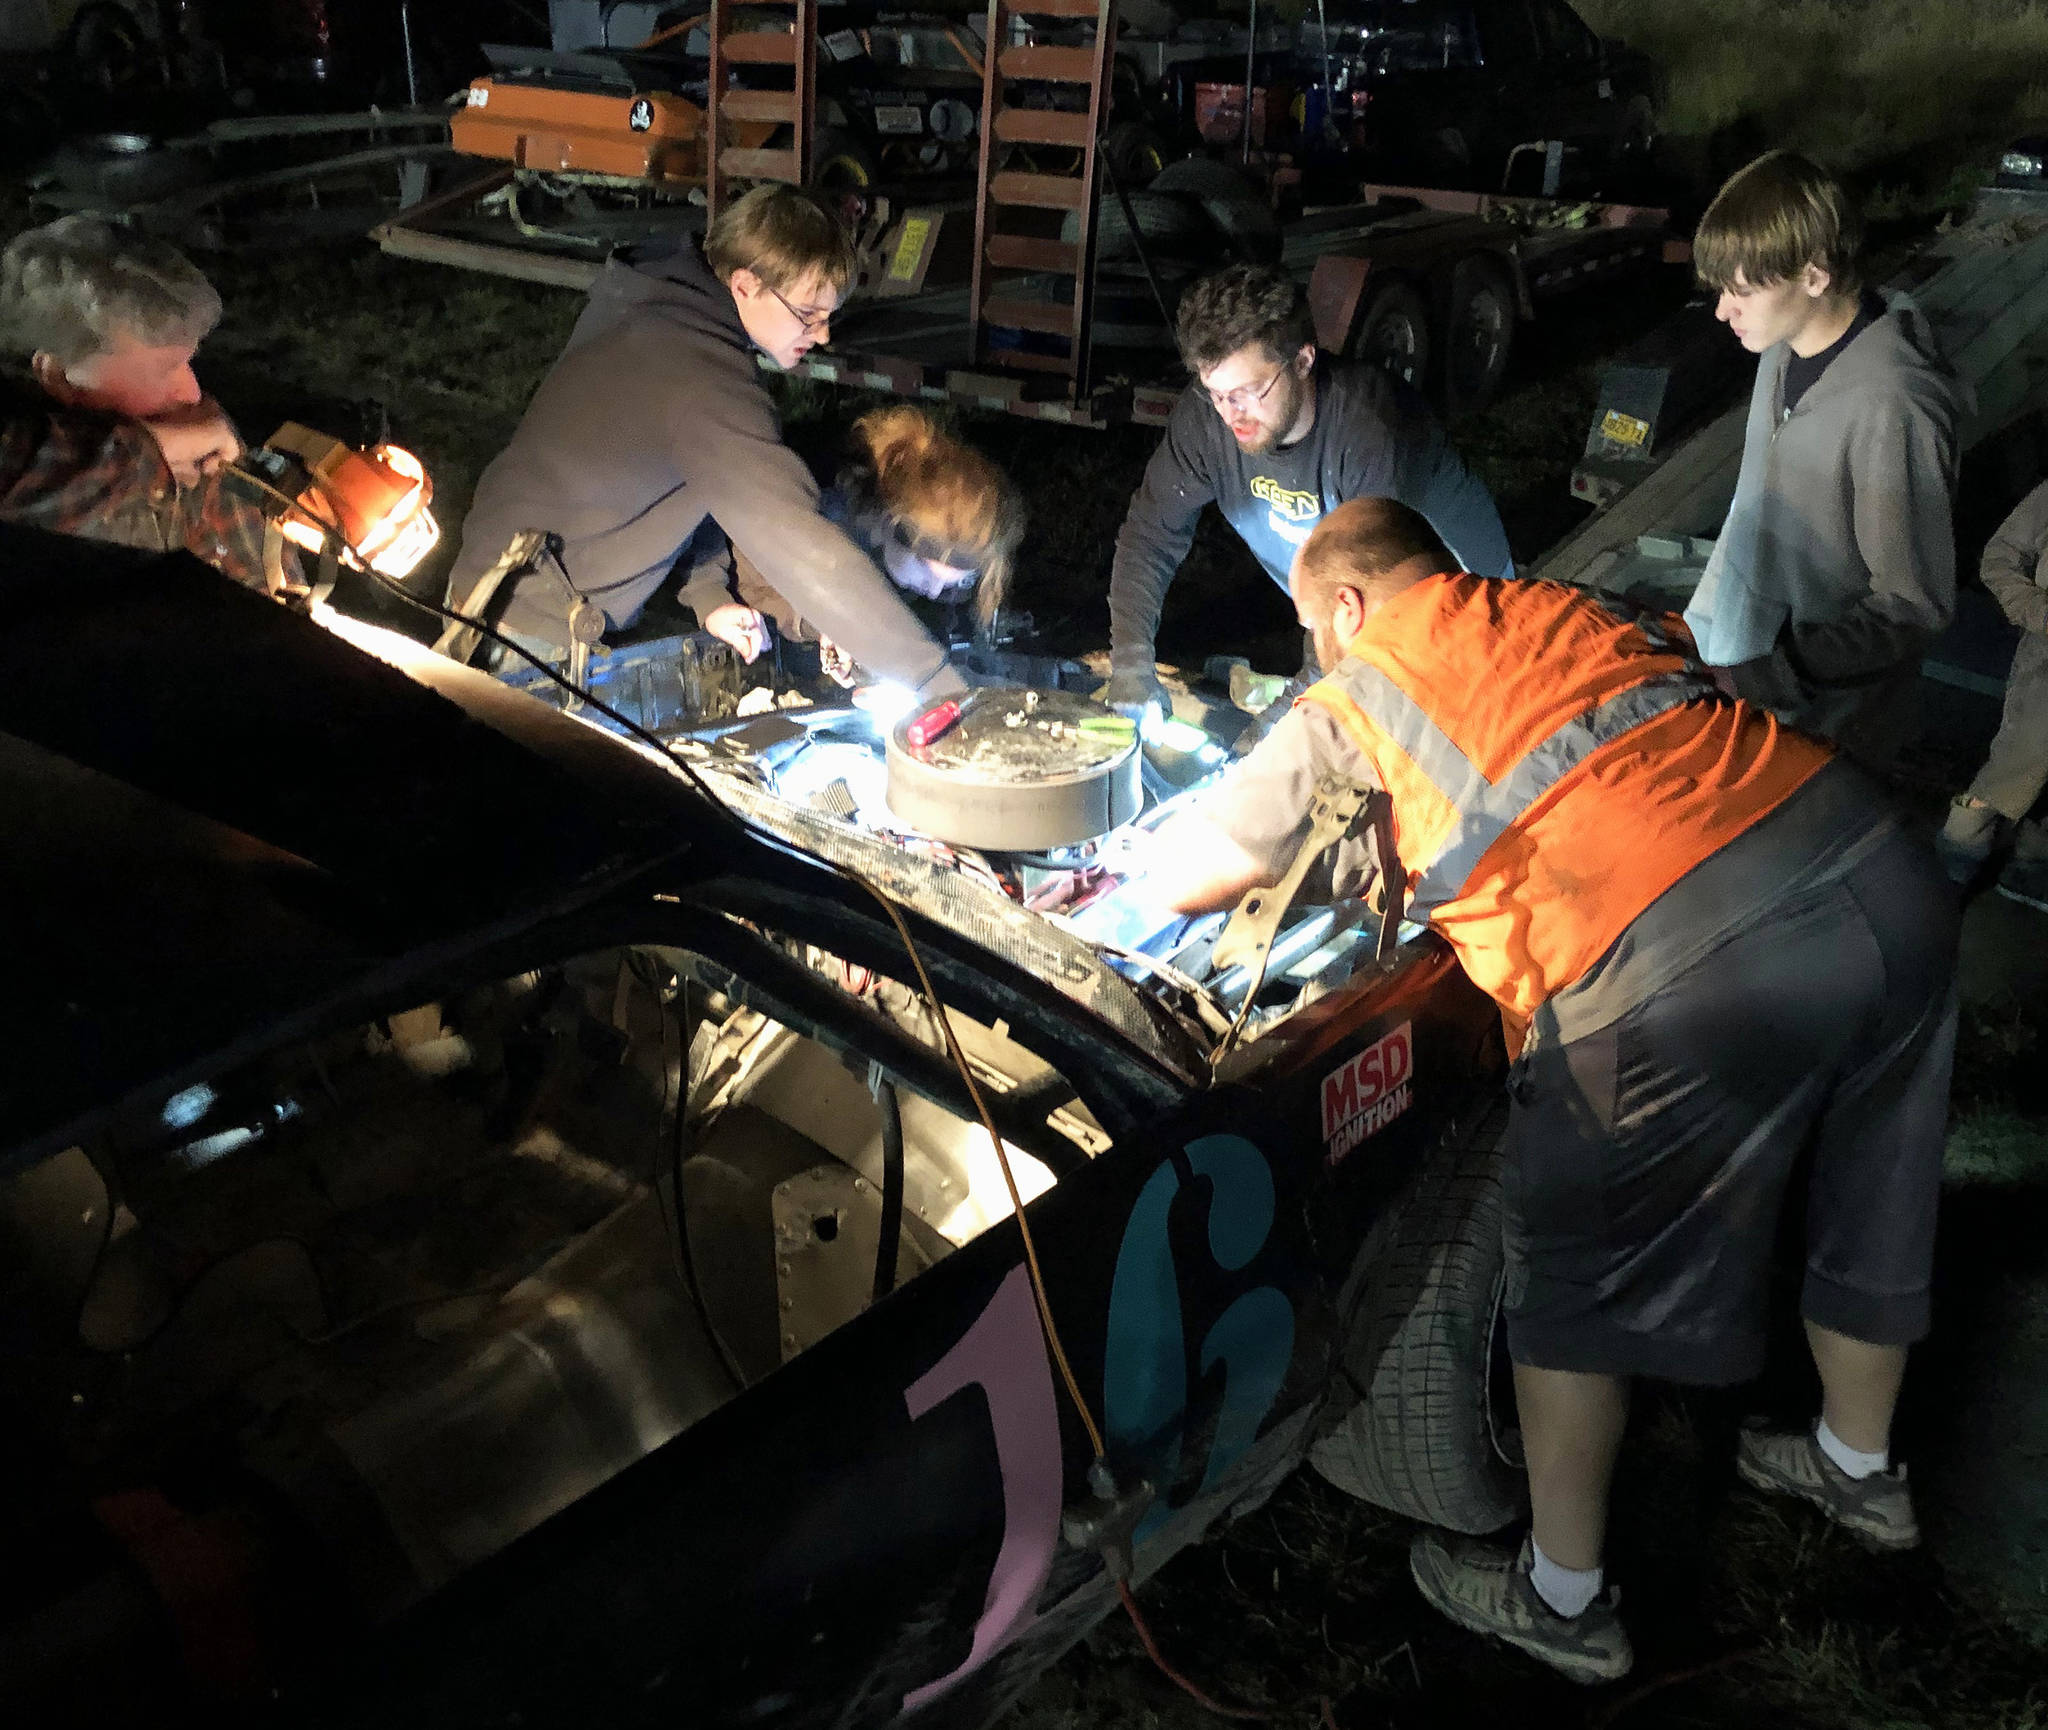 A crew of racers, mechanics and friends pore over the engine of Gracie Bass’ No. 16 A-Stock racer Friday, Sept. 6, 2019, at Twin City Raceway in Kenai, Alaska. (Photo by Joey Klecka/Peninsula Clarion)